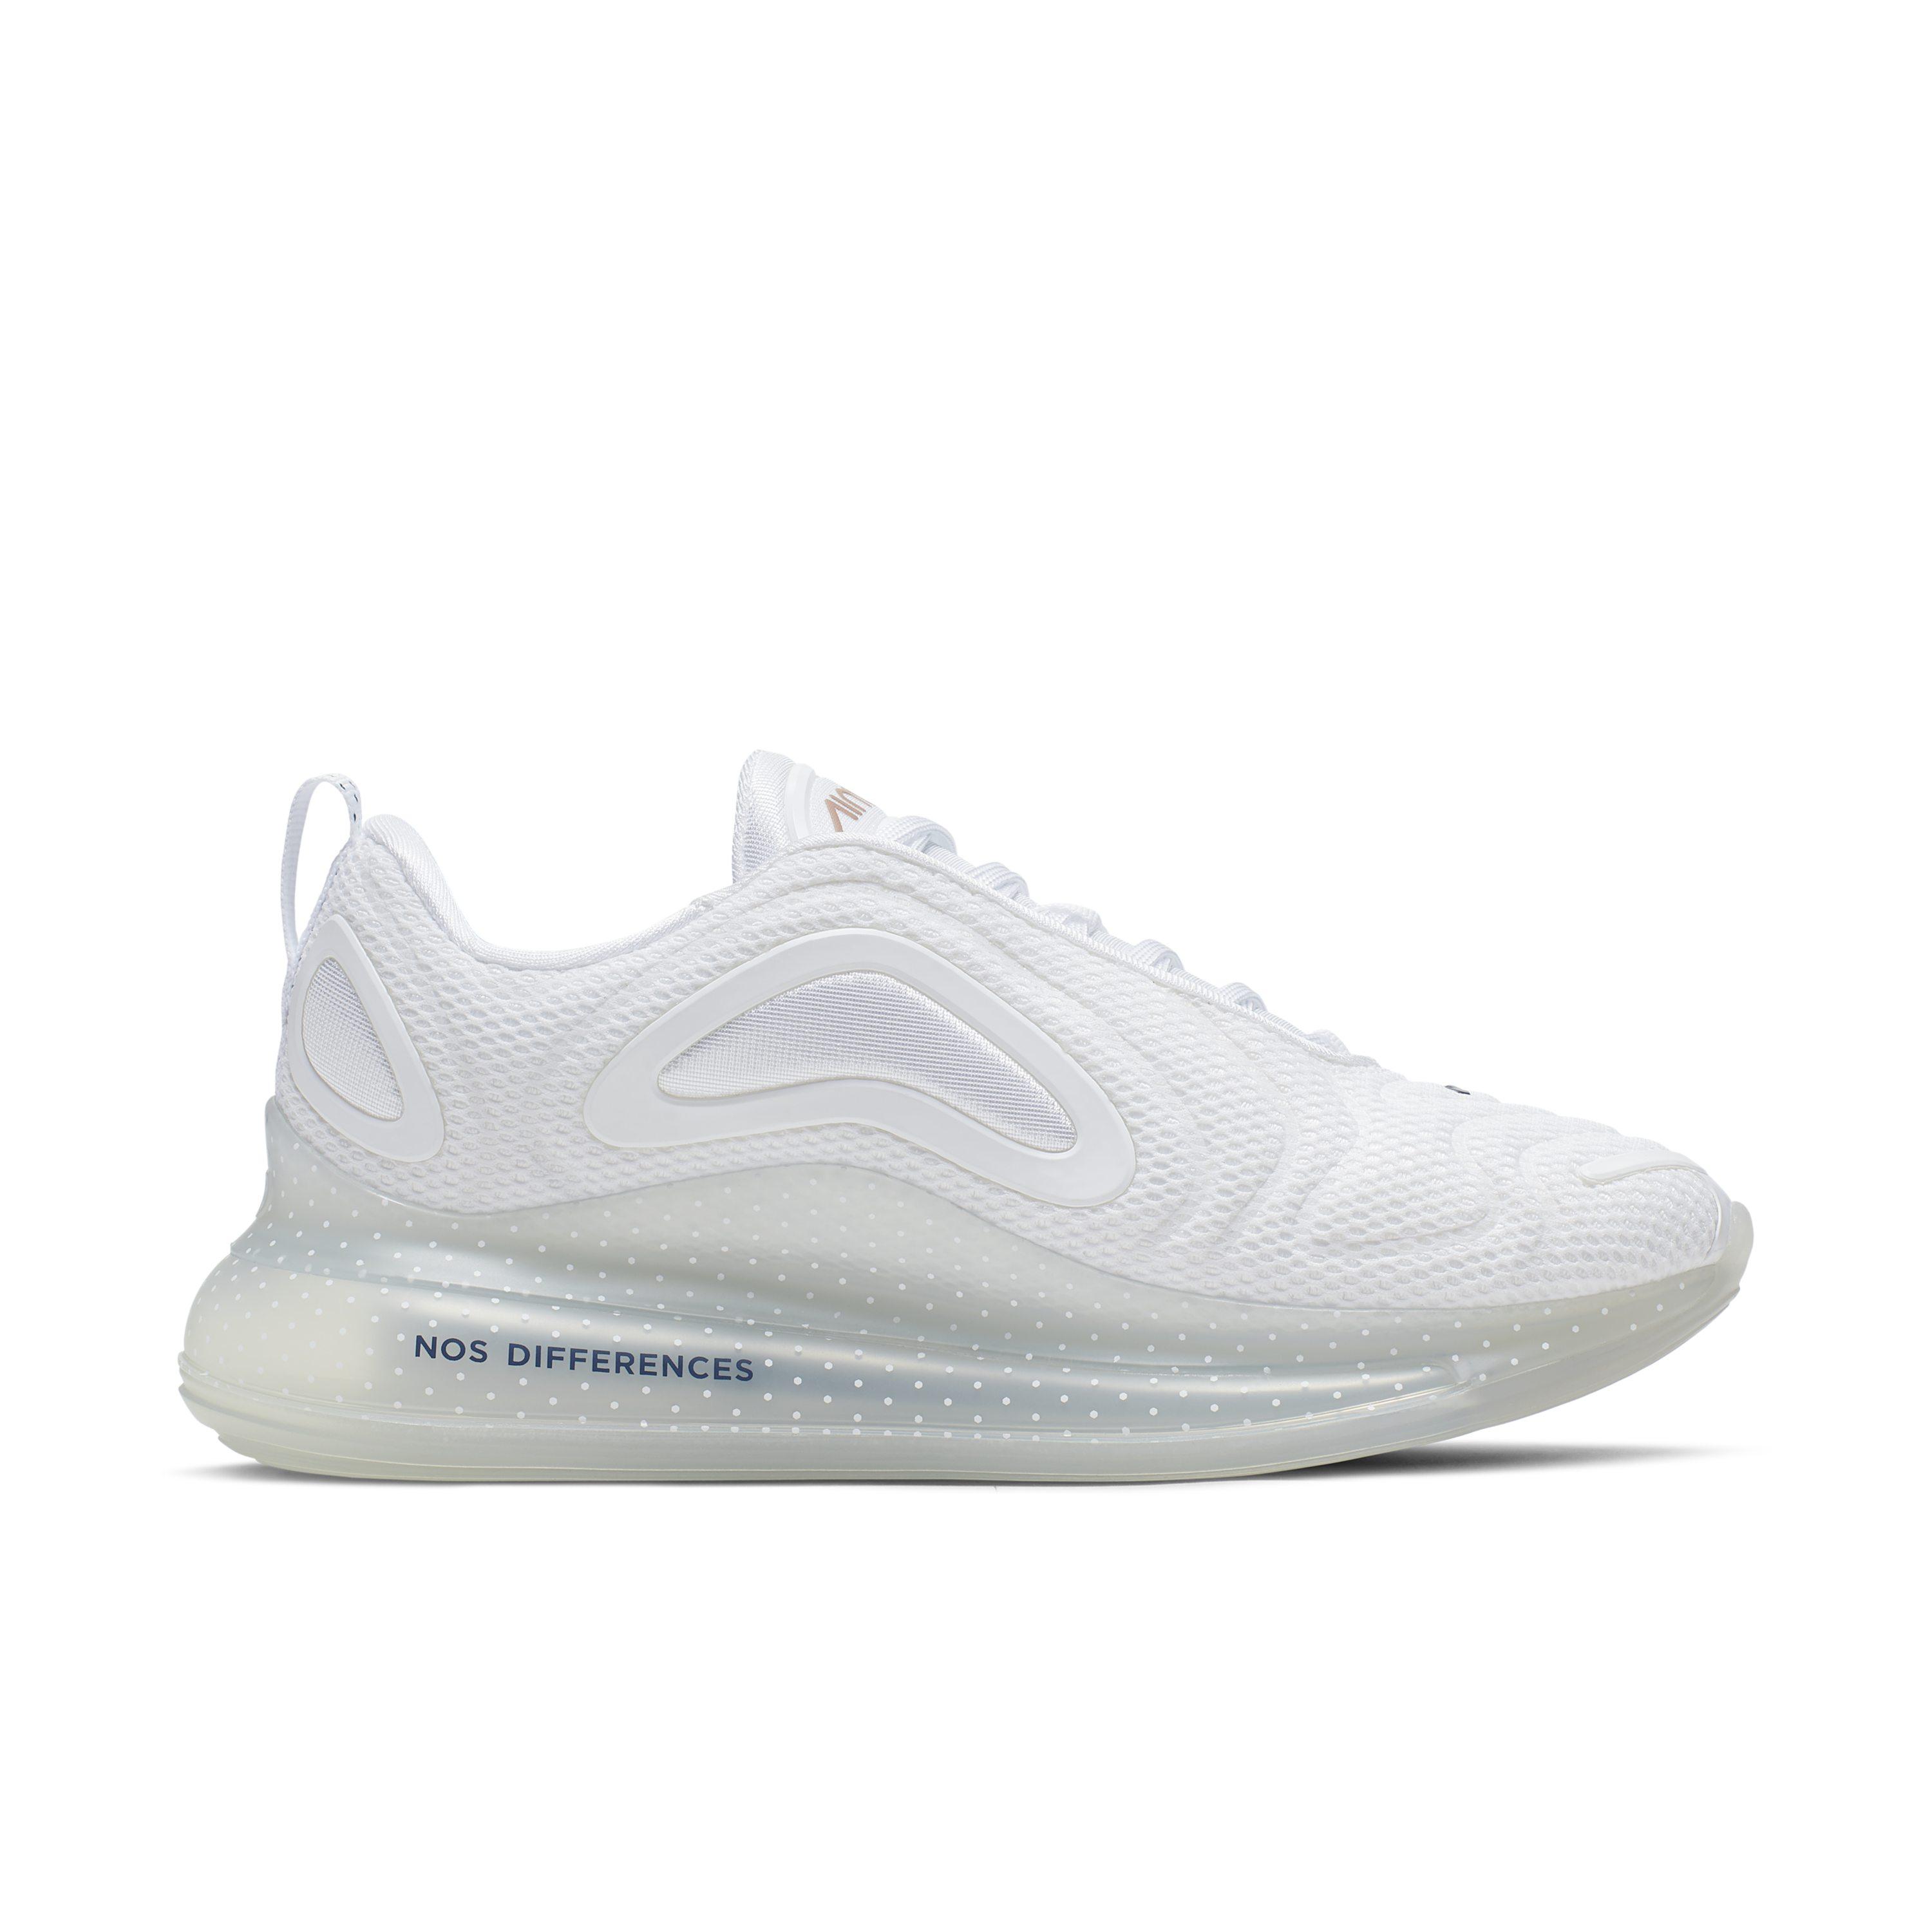 Nike Air Max 720 Unité Totale Shoe in White - Lyst